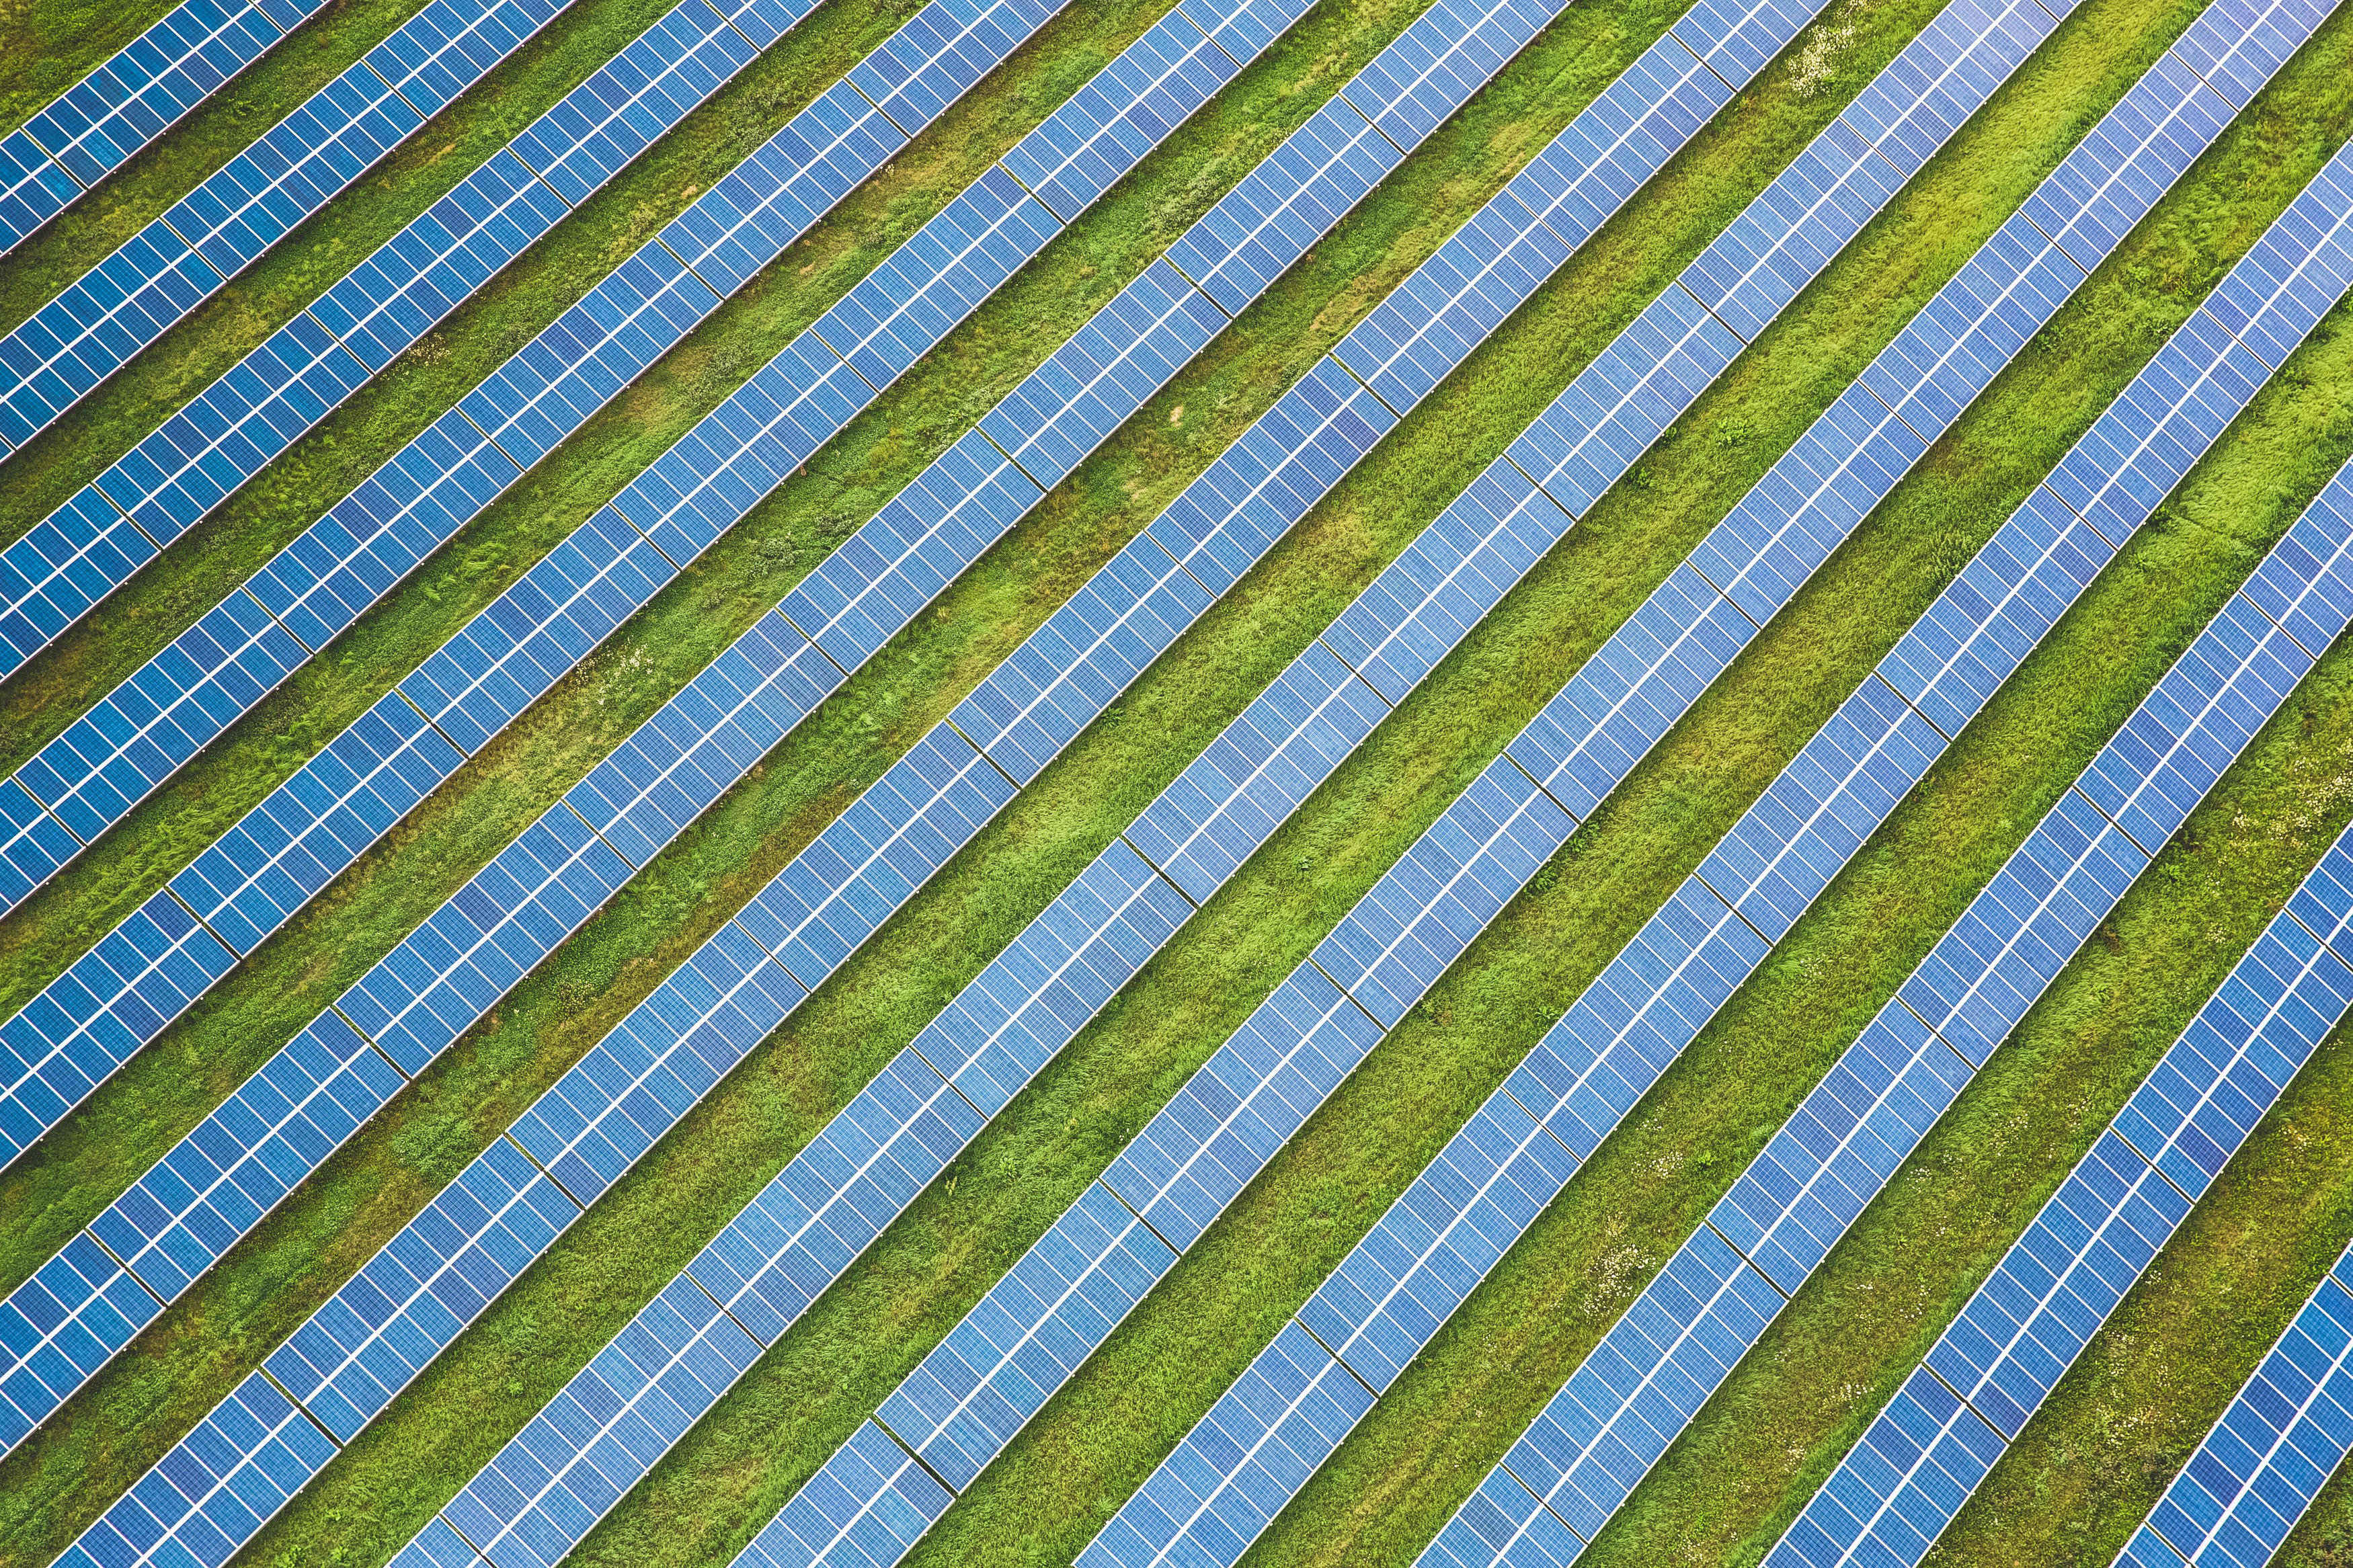 solar panels, textures, view from above, texture, field, rows, ranks